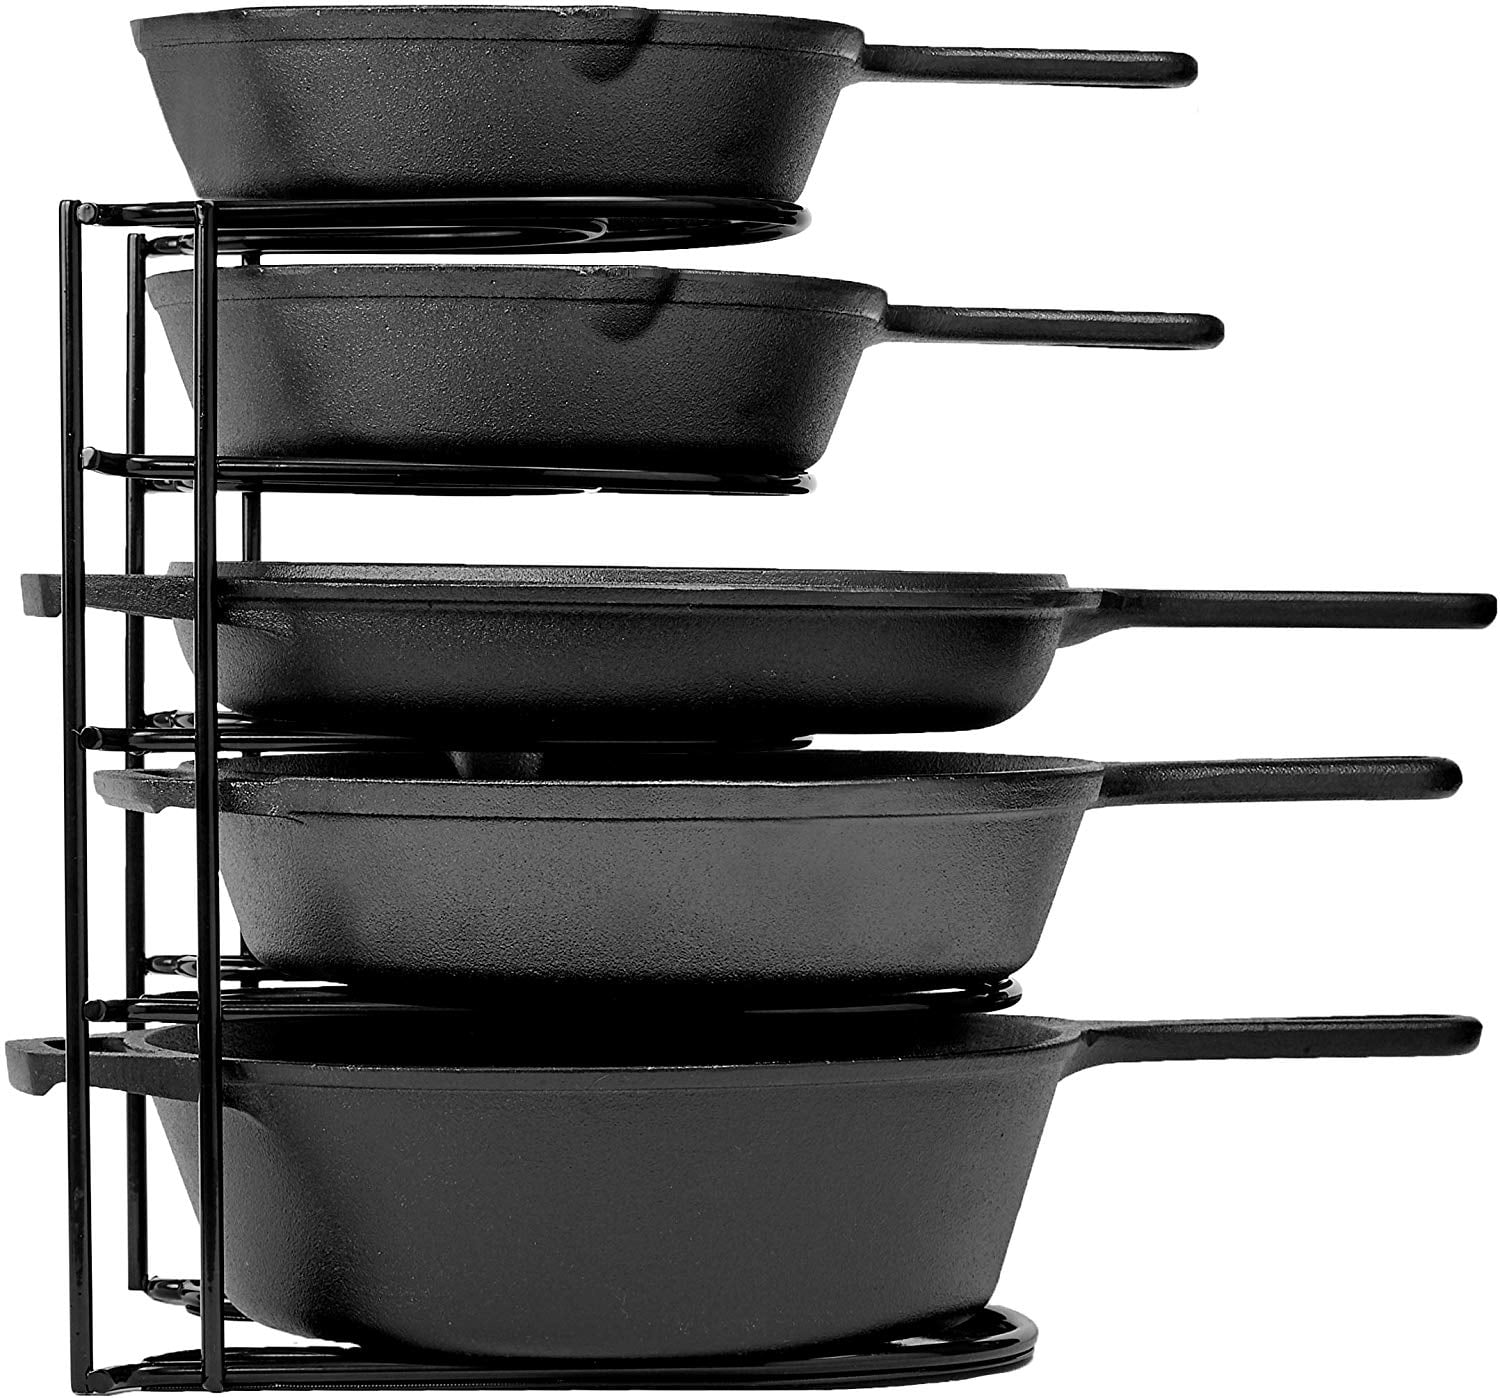 SANNO Pot Lid Holder,Wire Rack for Sorting Trays,Pans and Other Cookware Items,Freestanding Pan Stand with 6 Slots,White